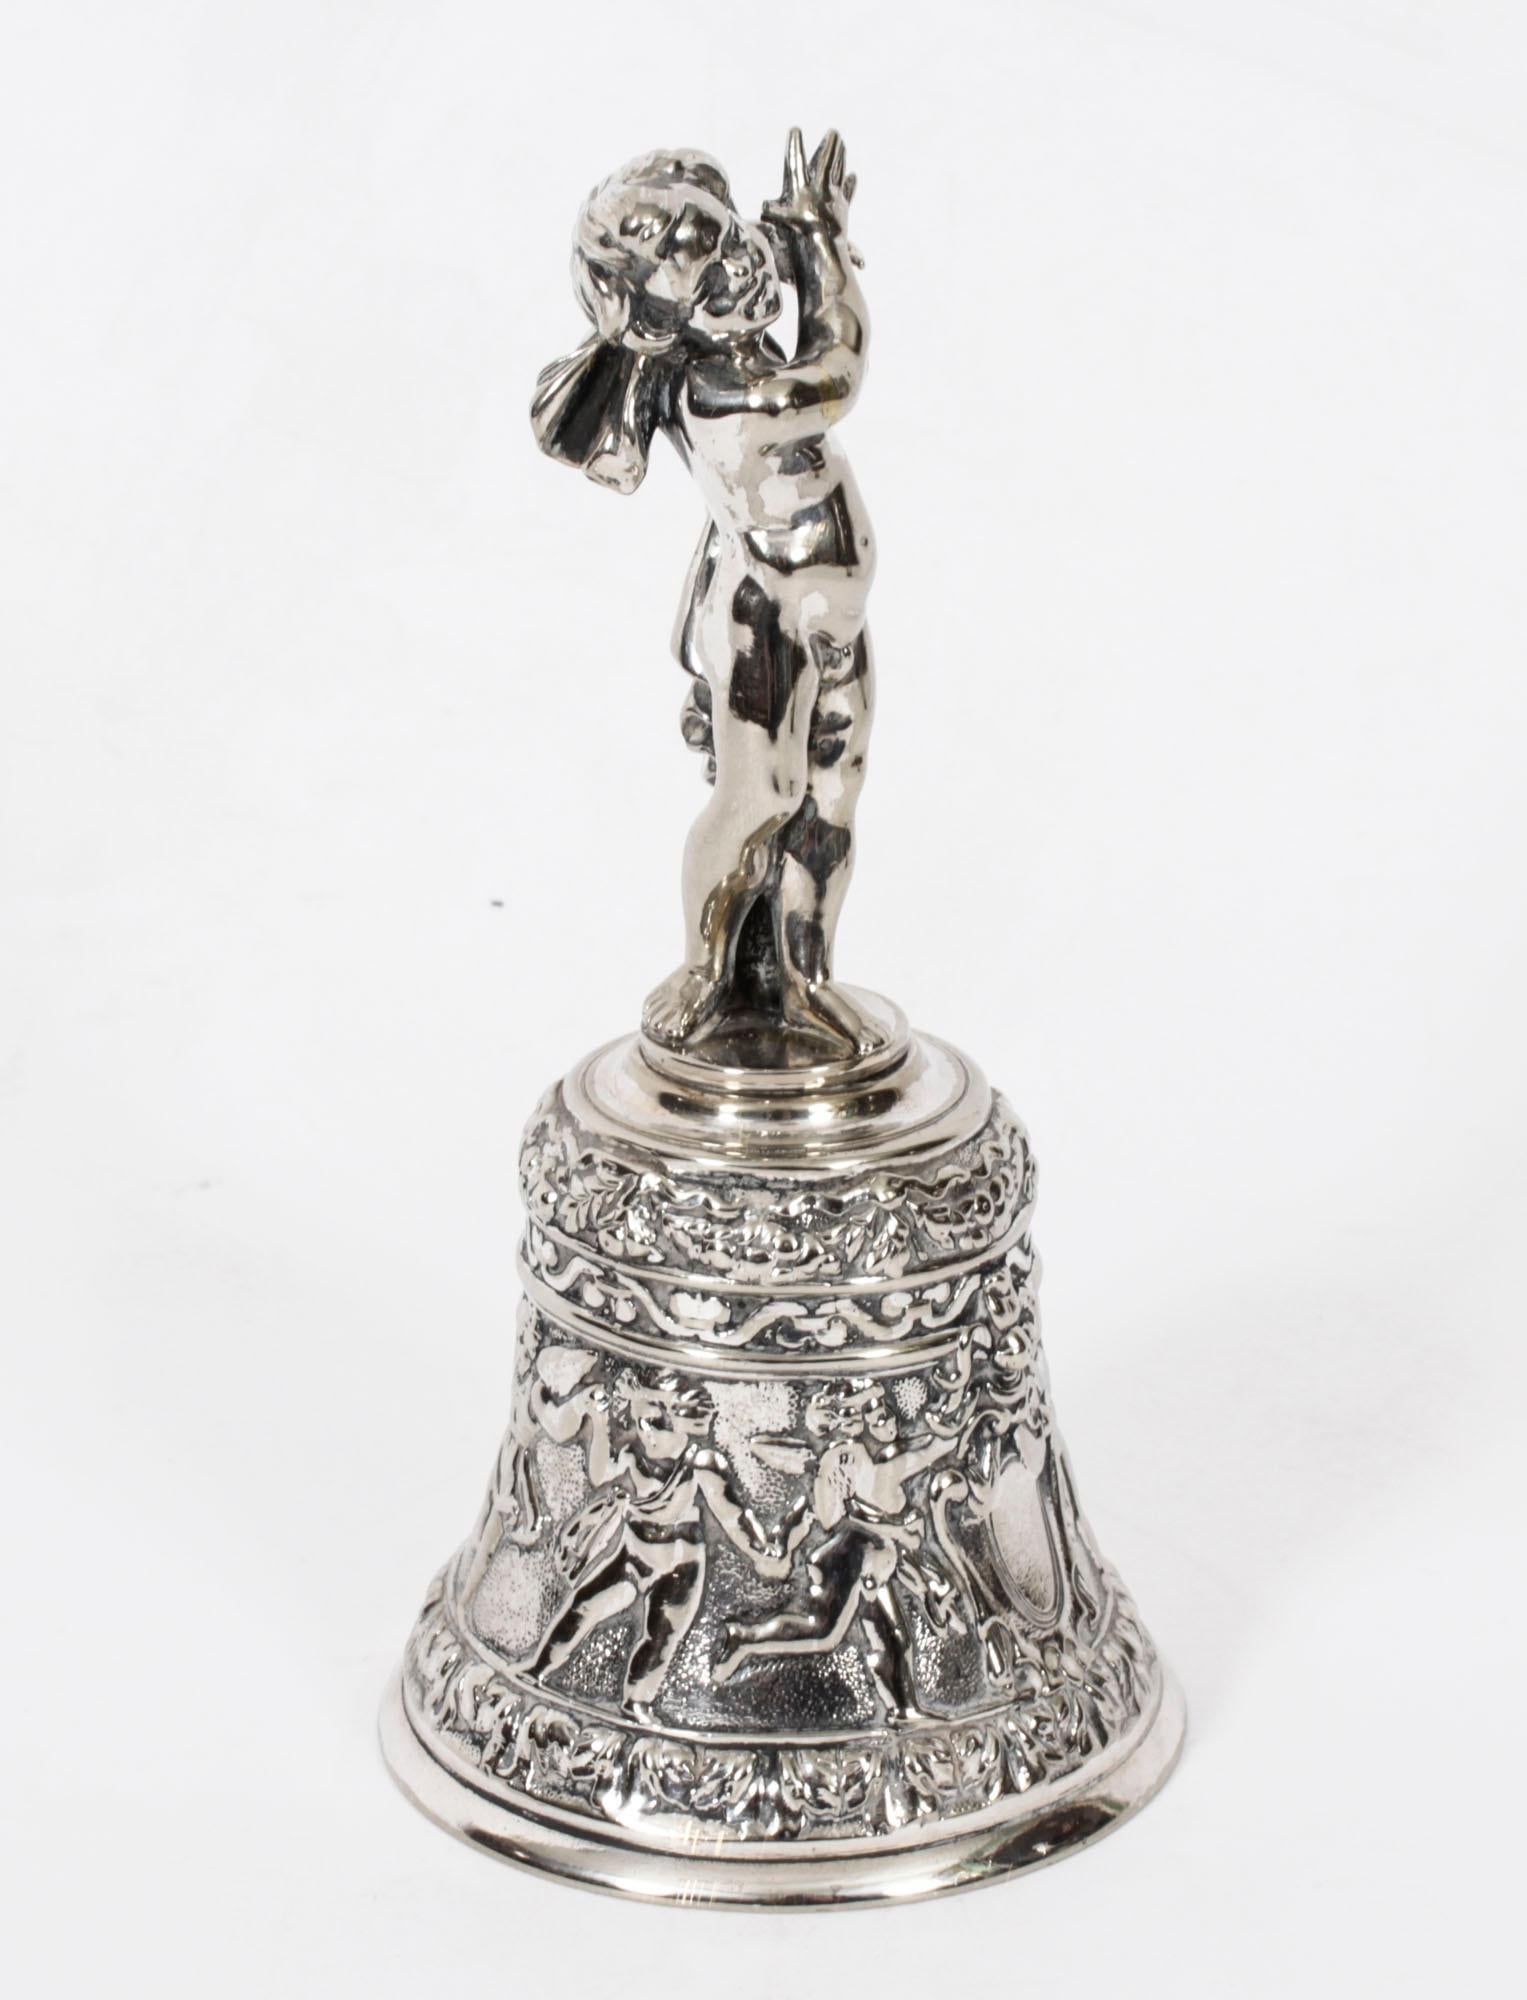 Antique Silver Plated Hand Bell Renaissance Revival 19th Century In Good Condition For Sale In London, GB